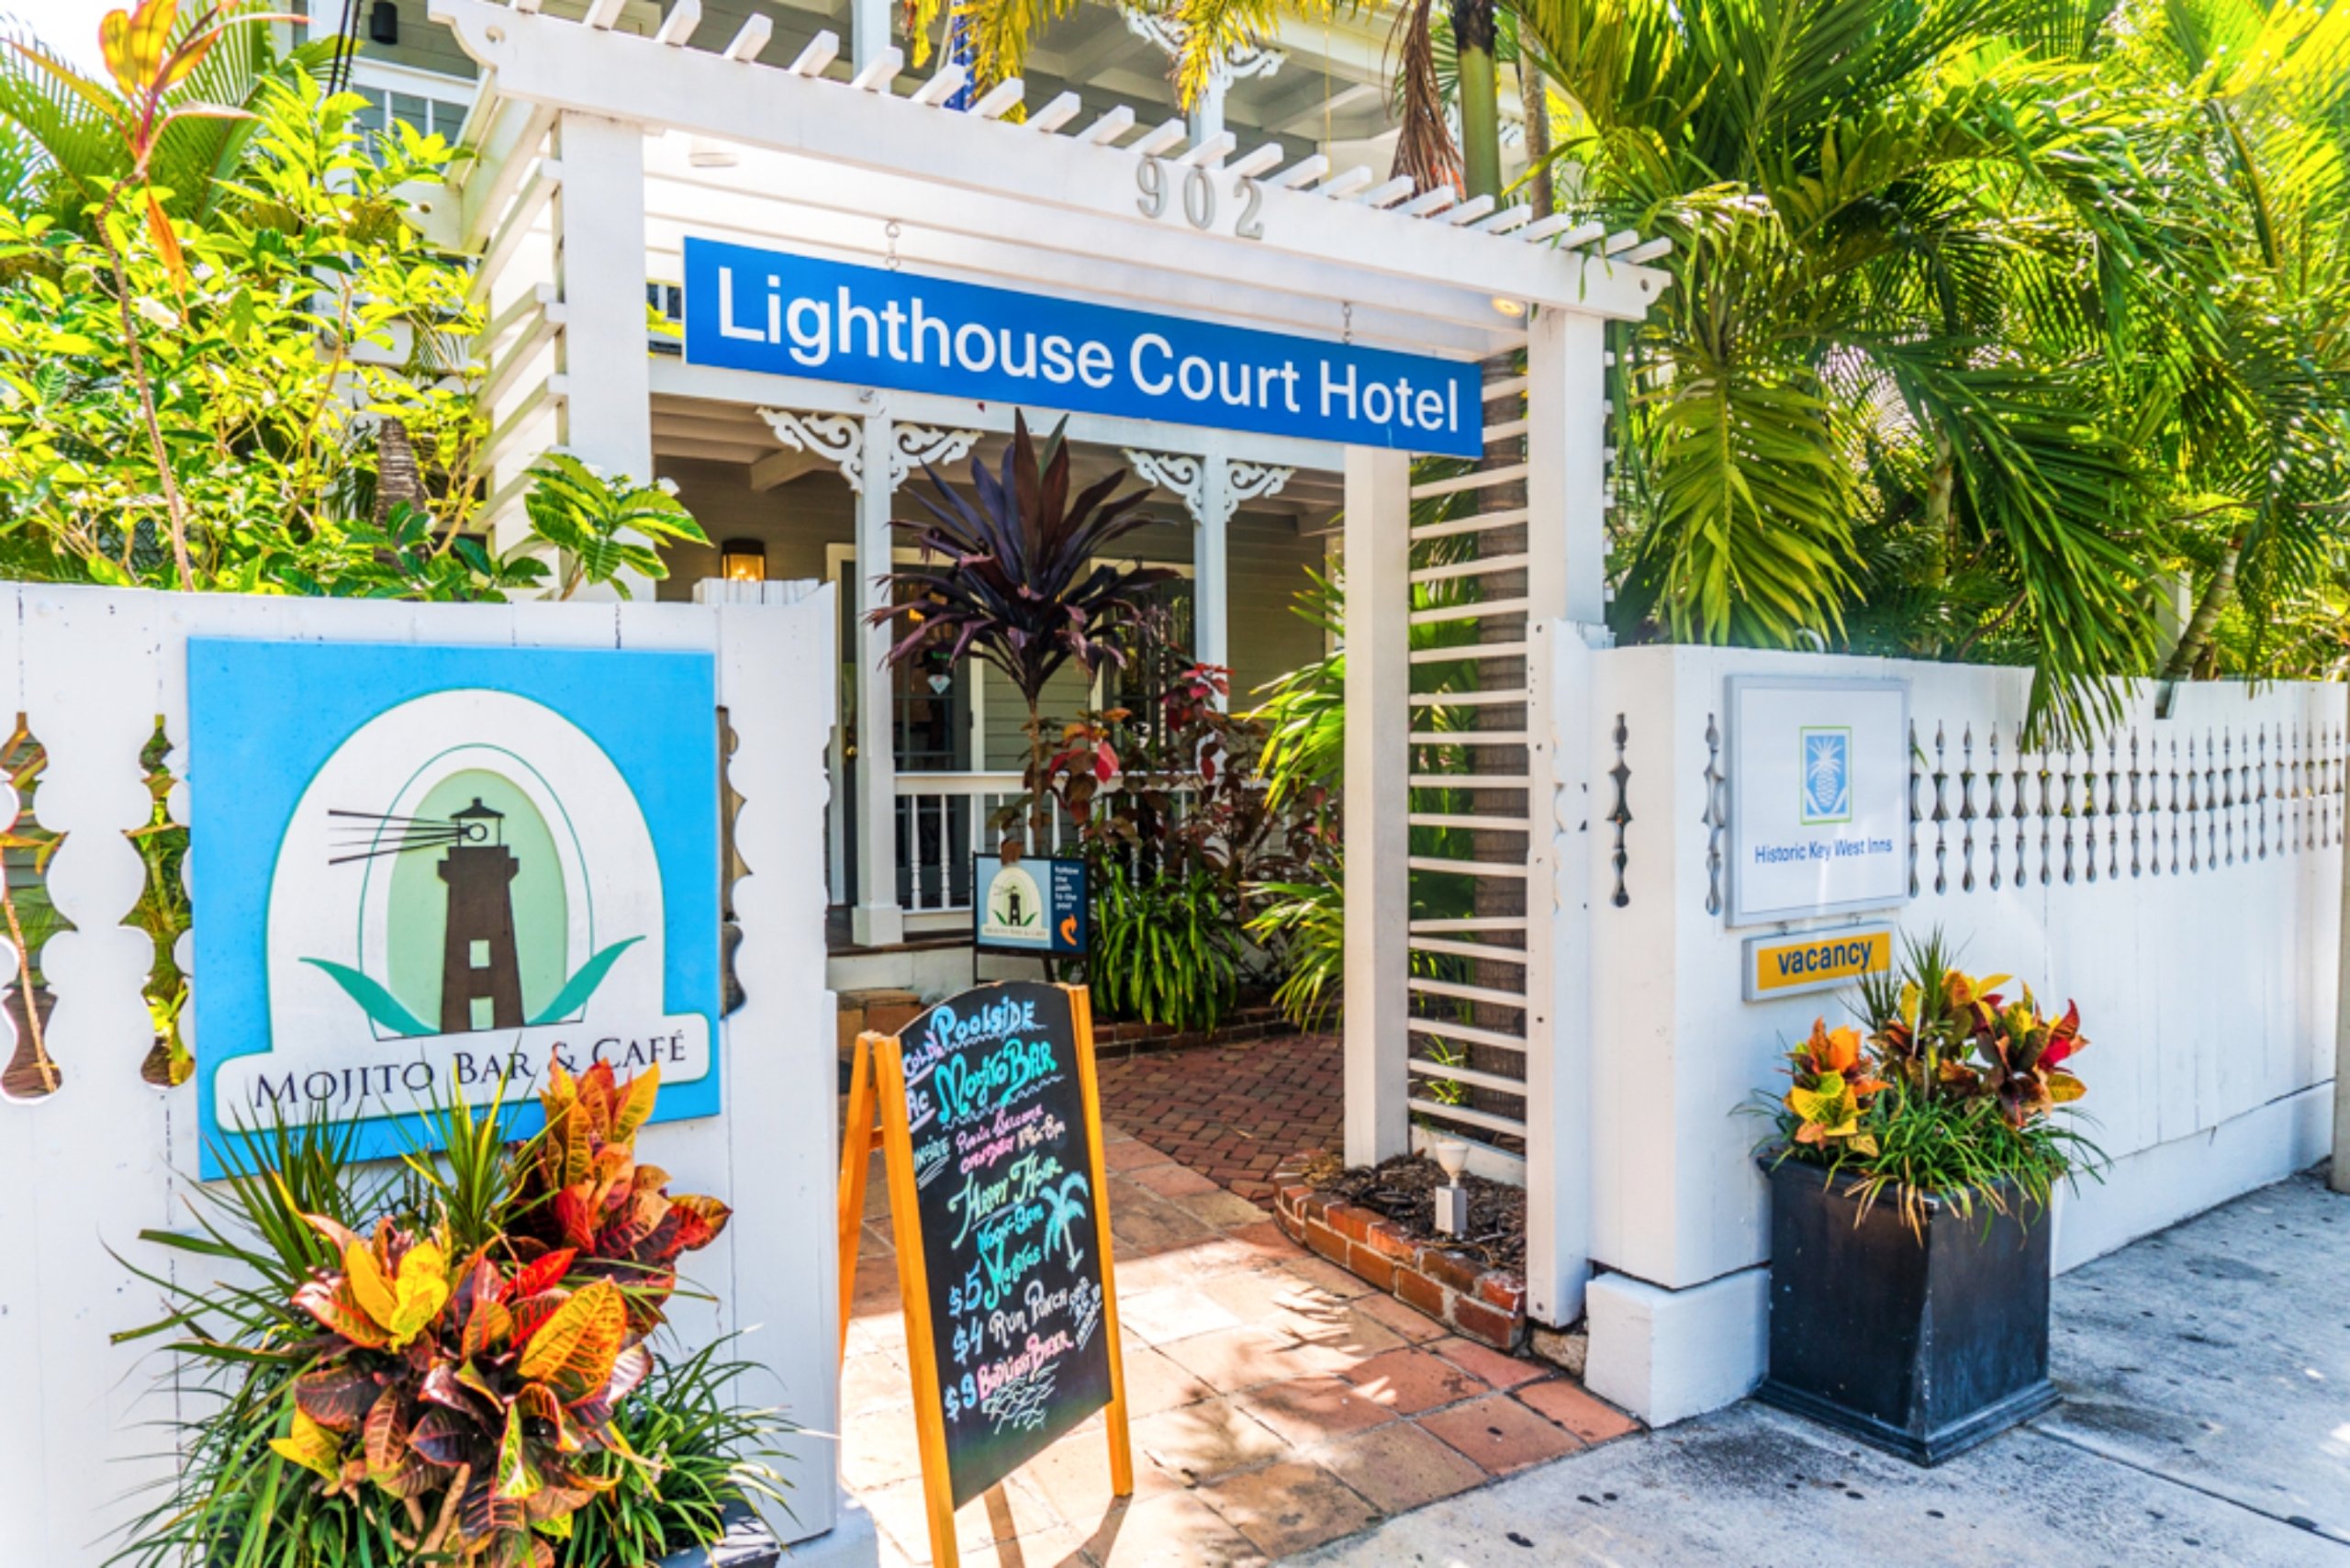 The outside of the old Lighthouse Court Hotel with a white wooden fence and flower planters